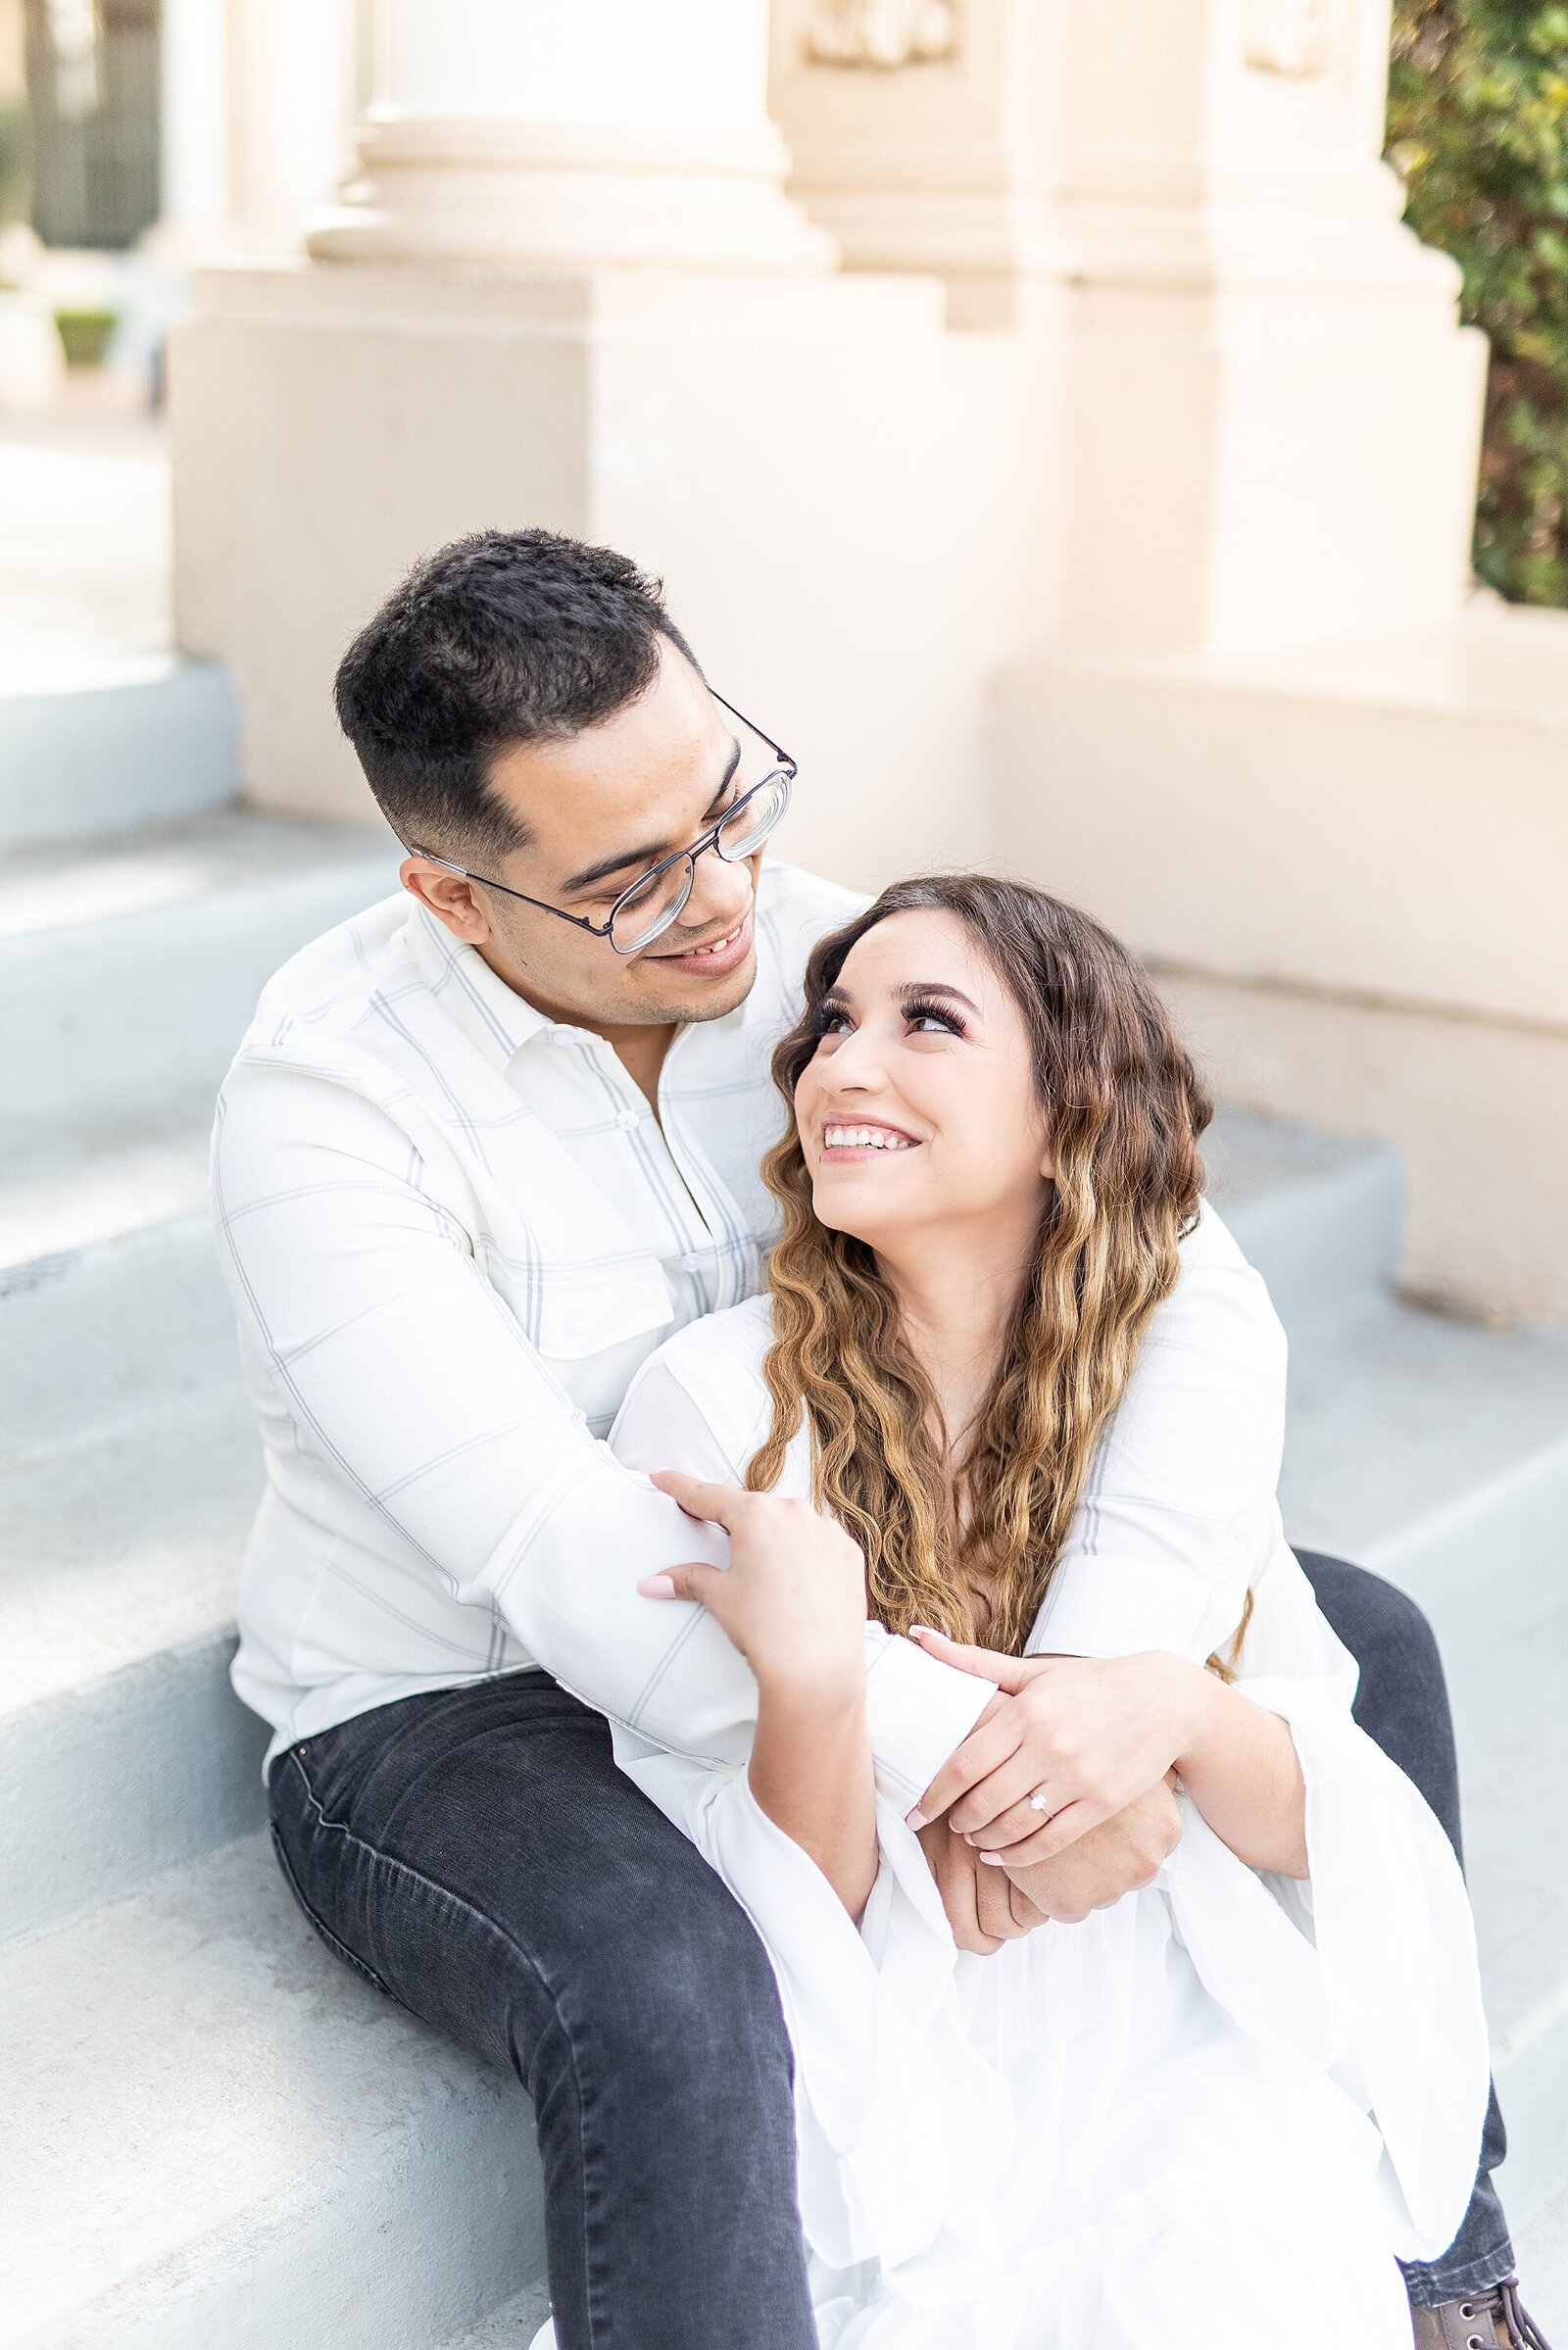 Balboa park engagement session with newly engaged couple in San Diego, California.